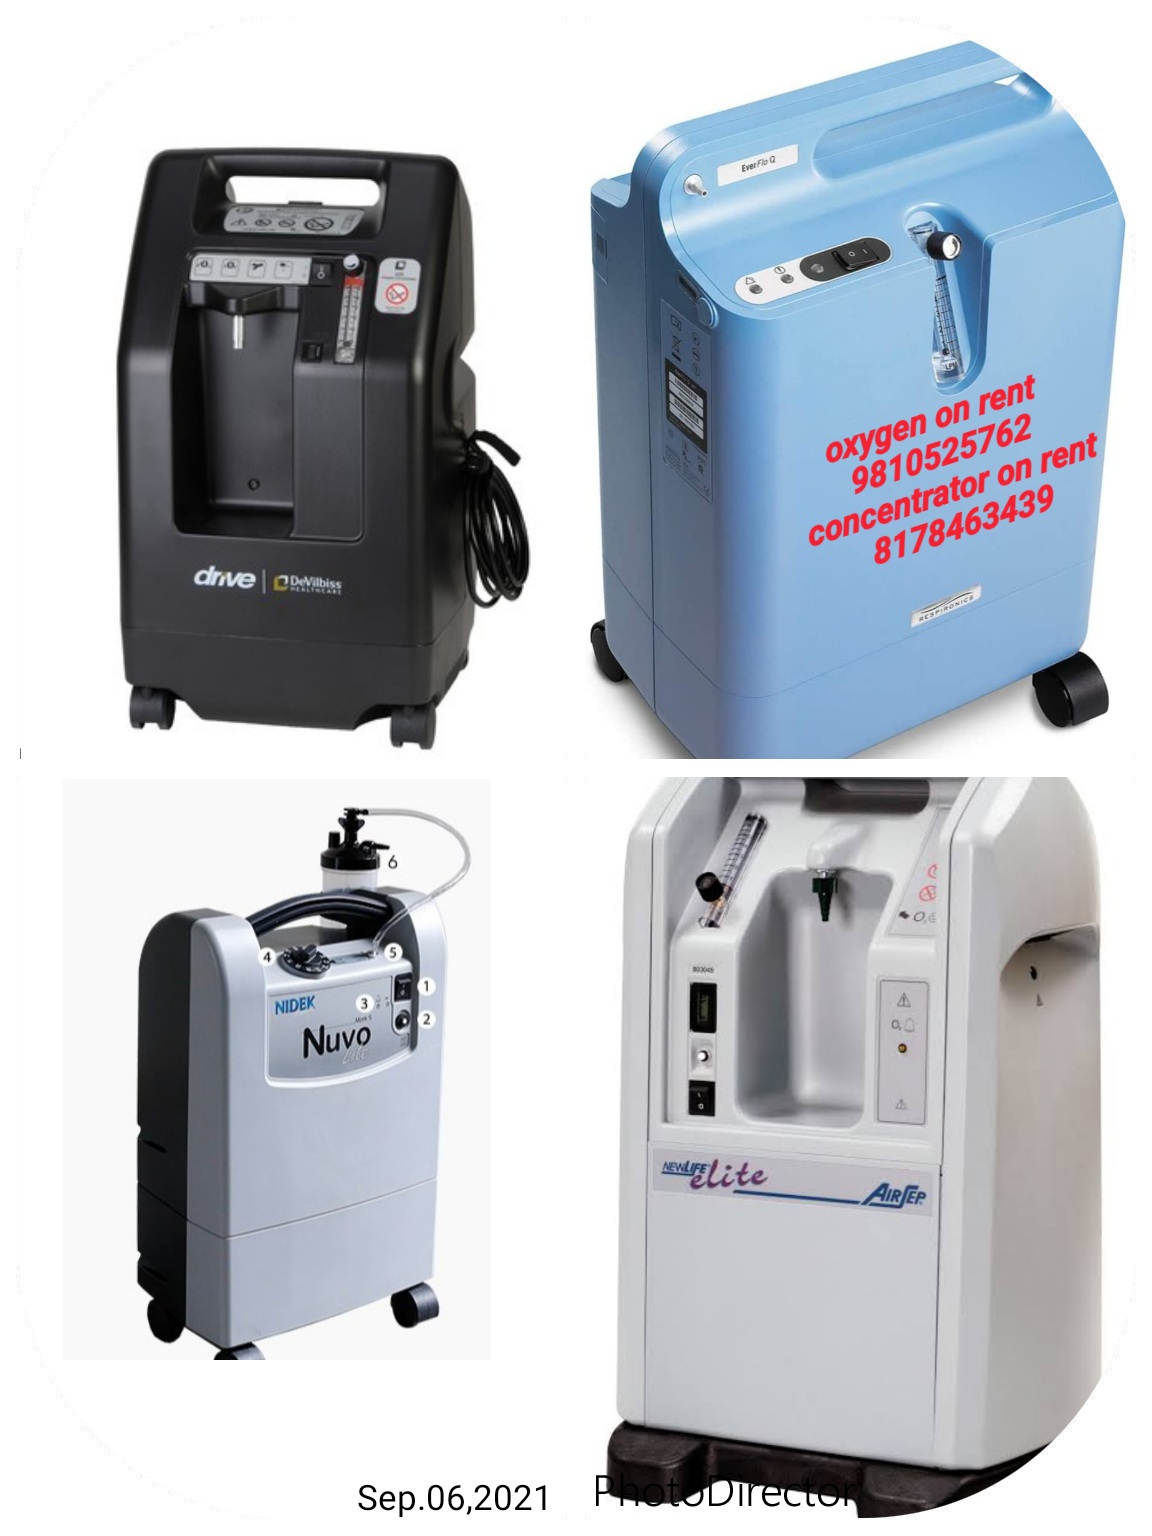 Portable Oxygen Concentrator For Home On Rent In Mandawali 8178463439